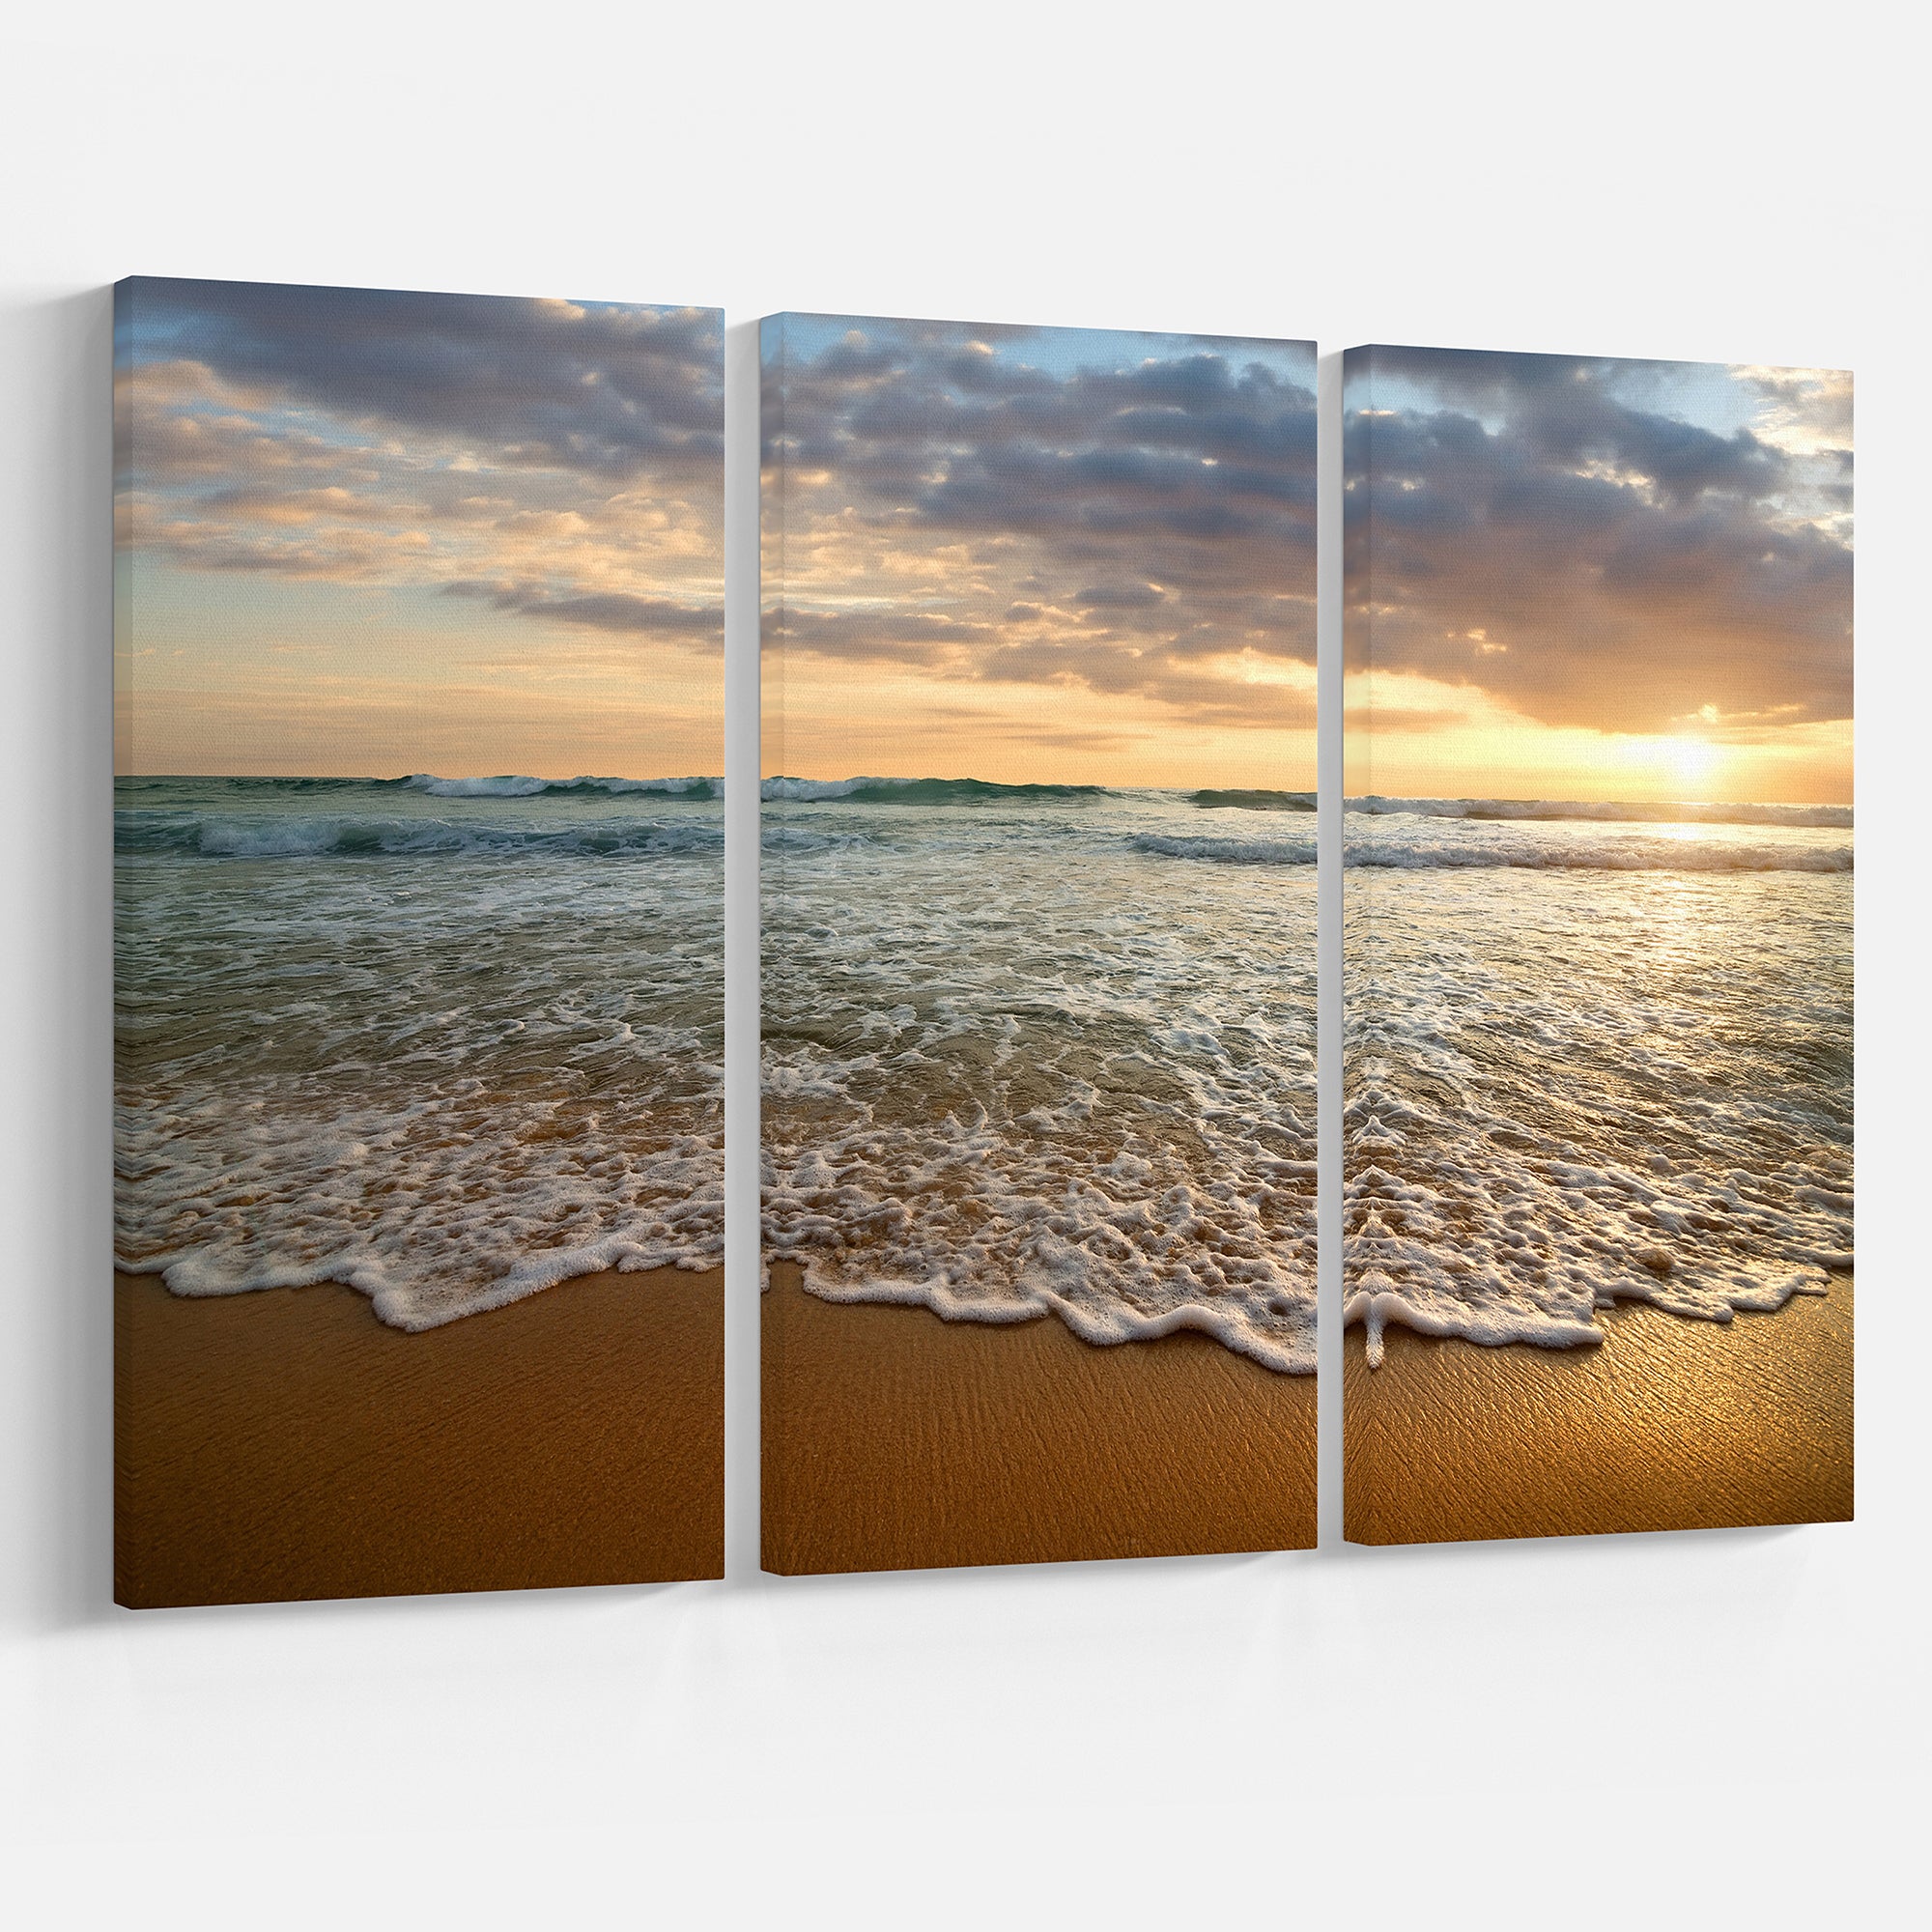 Bright Cloudy Sunset in Calm Ocean Multi-Panels